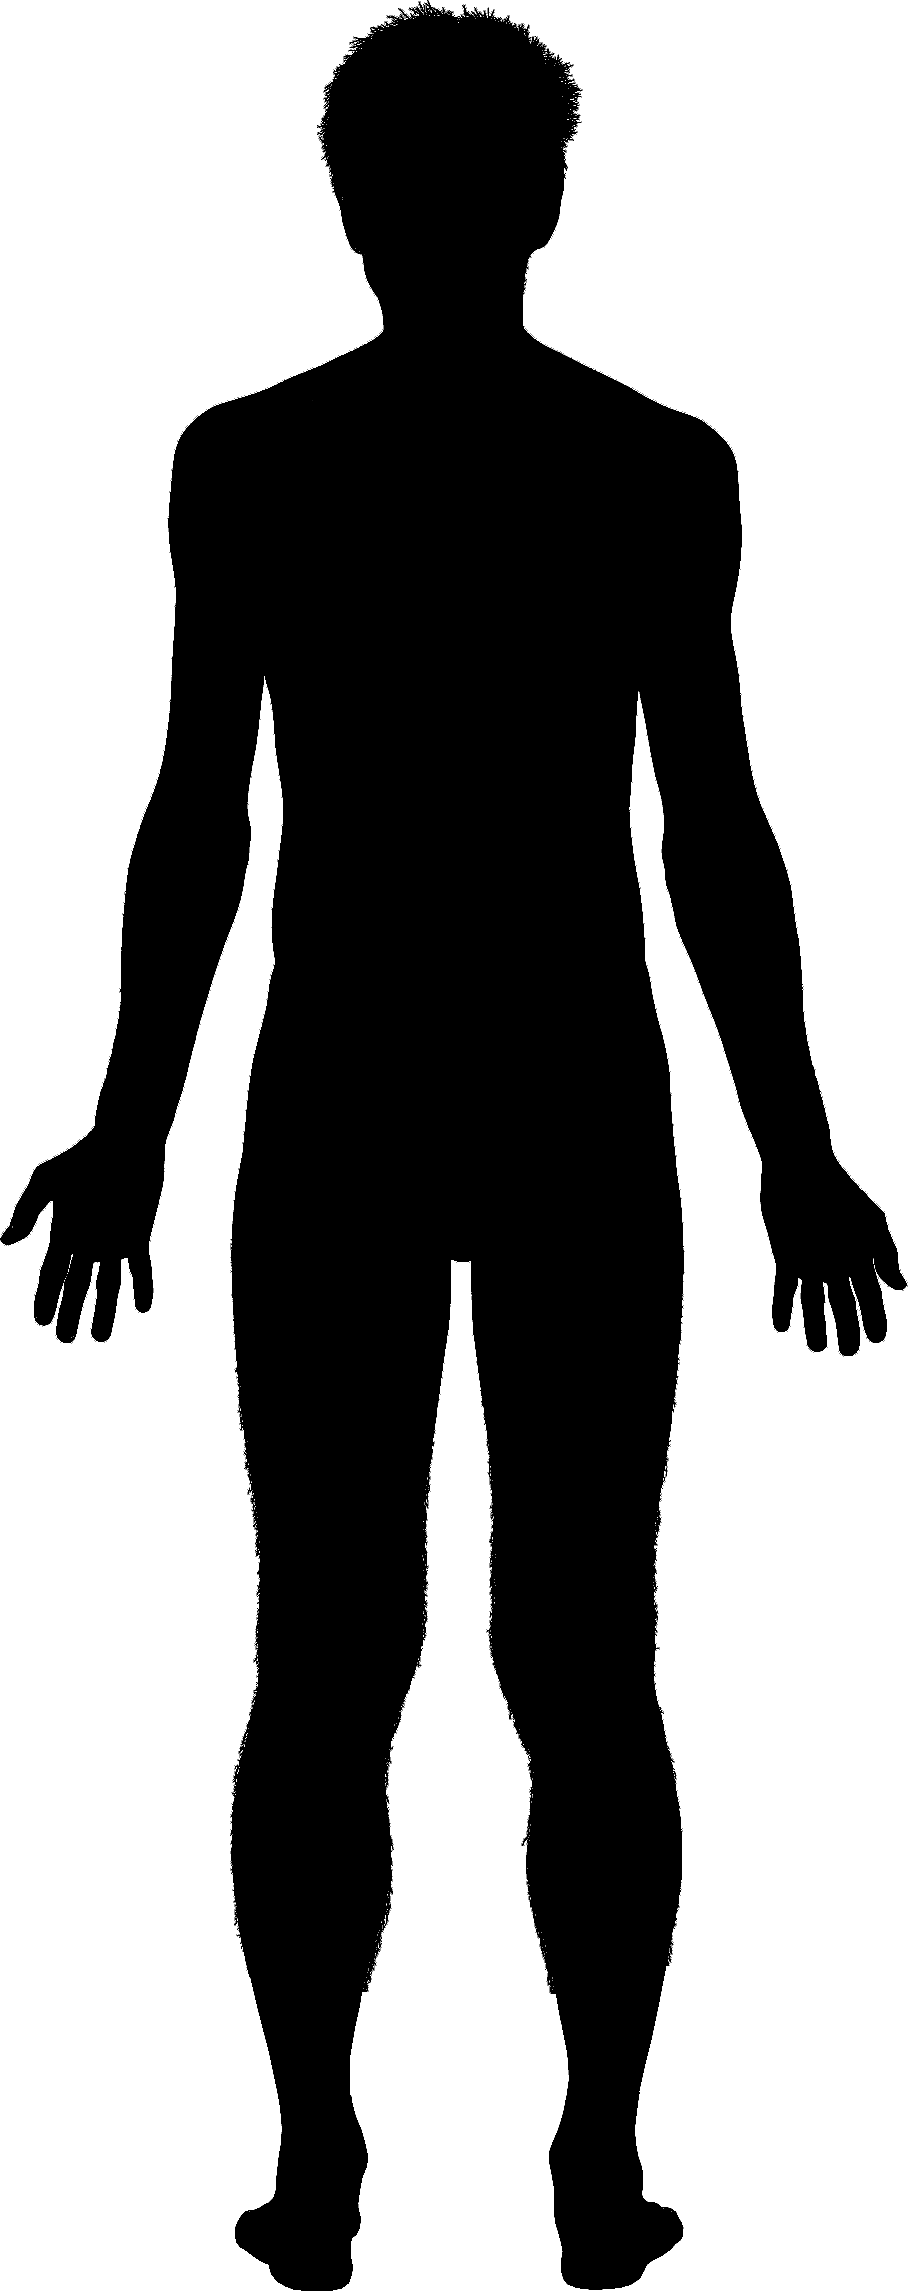 Human Body Outline Image - ClipArt Best